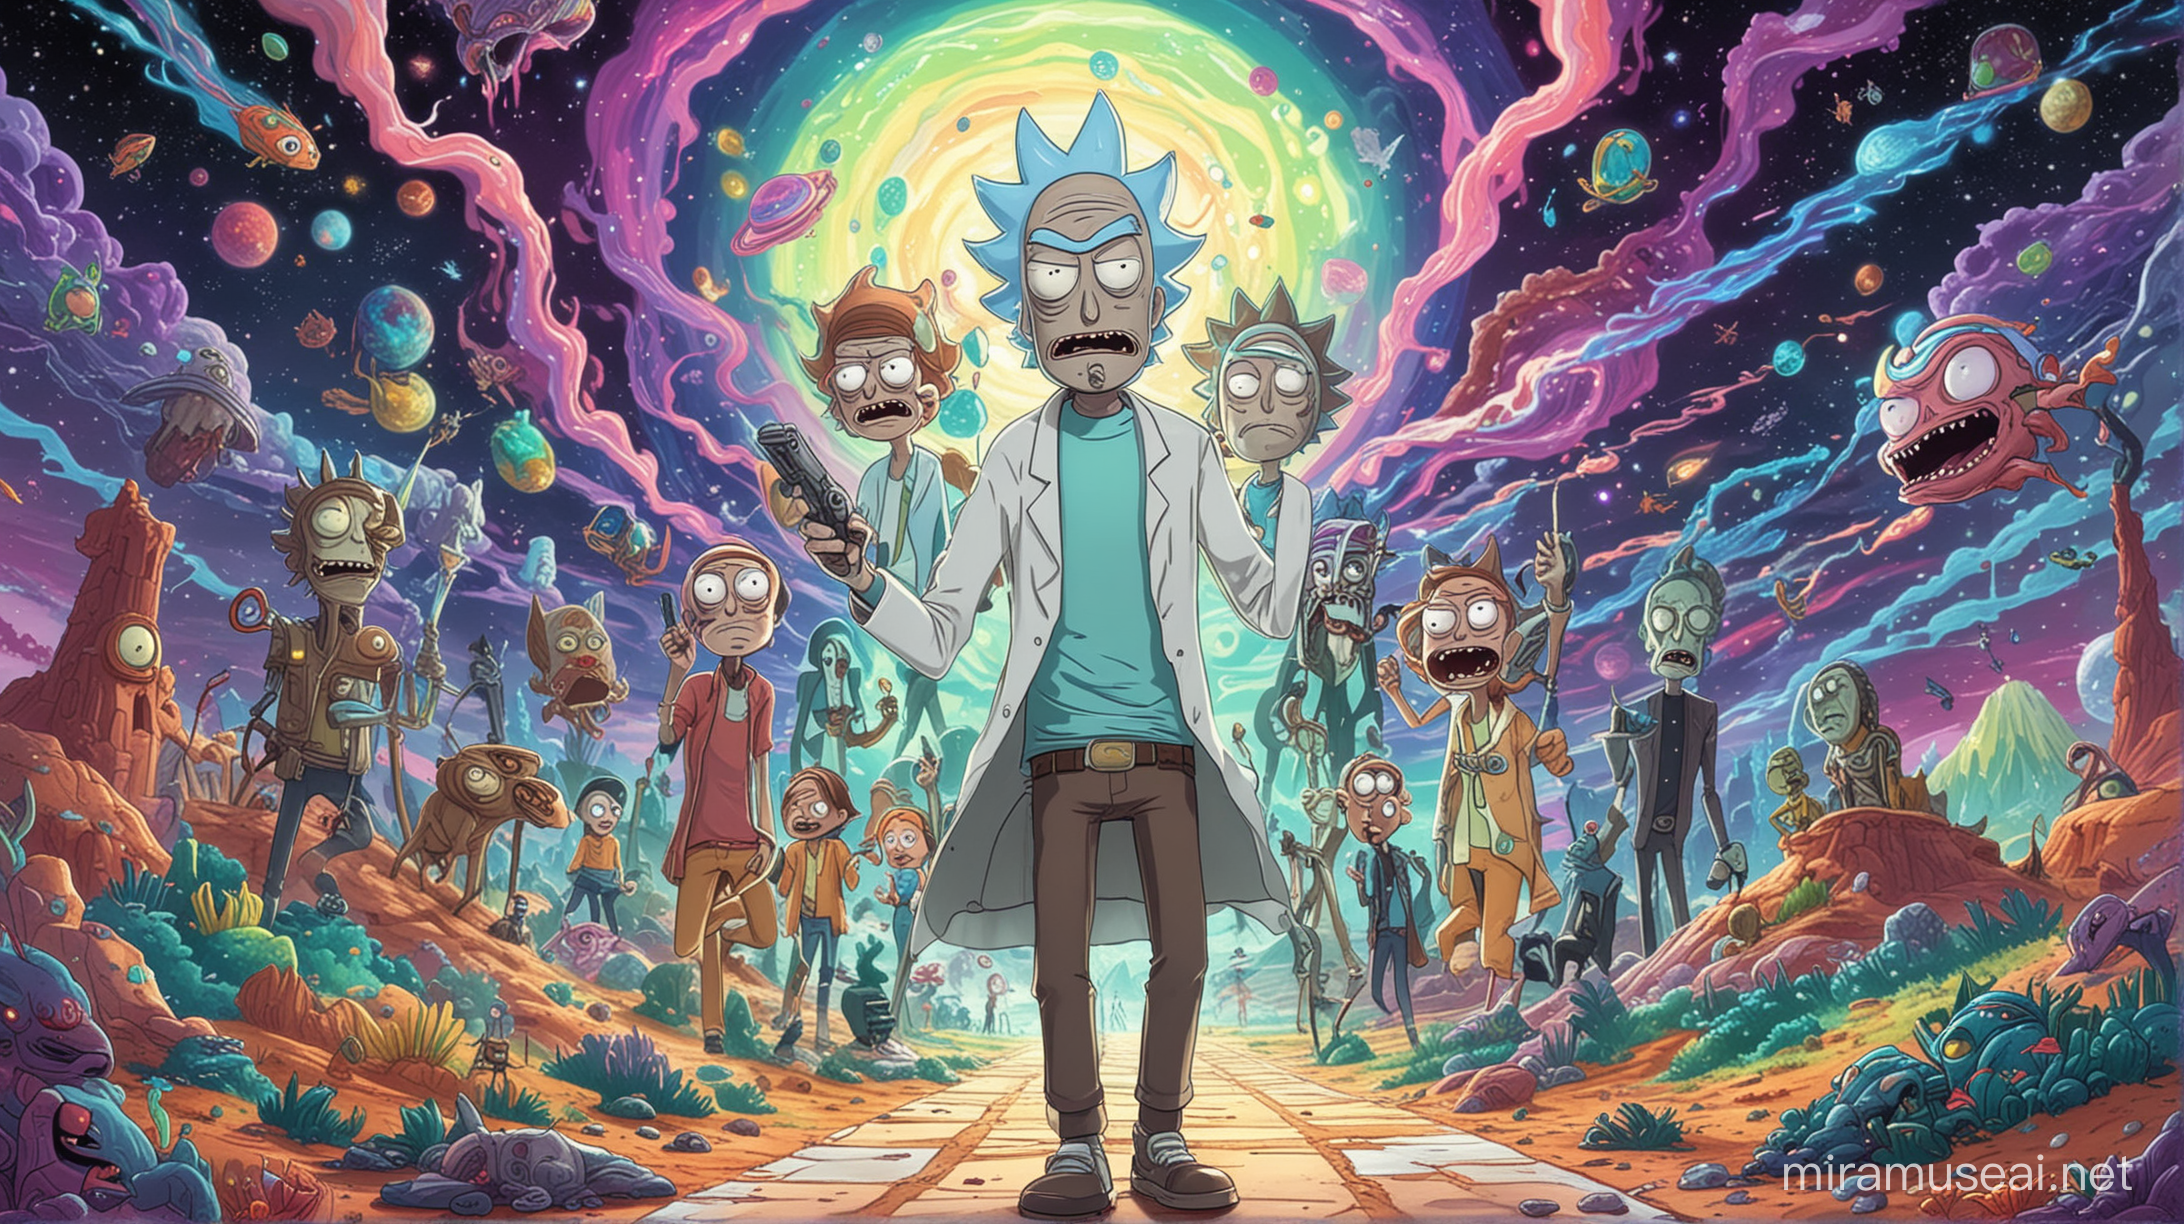 Exploring an Alternate Dimension Like Rick and Morty